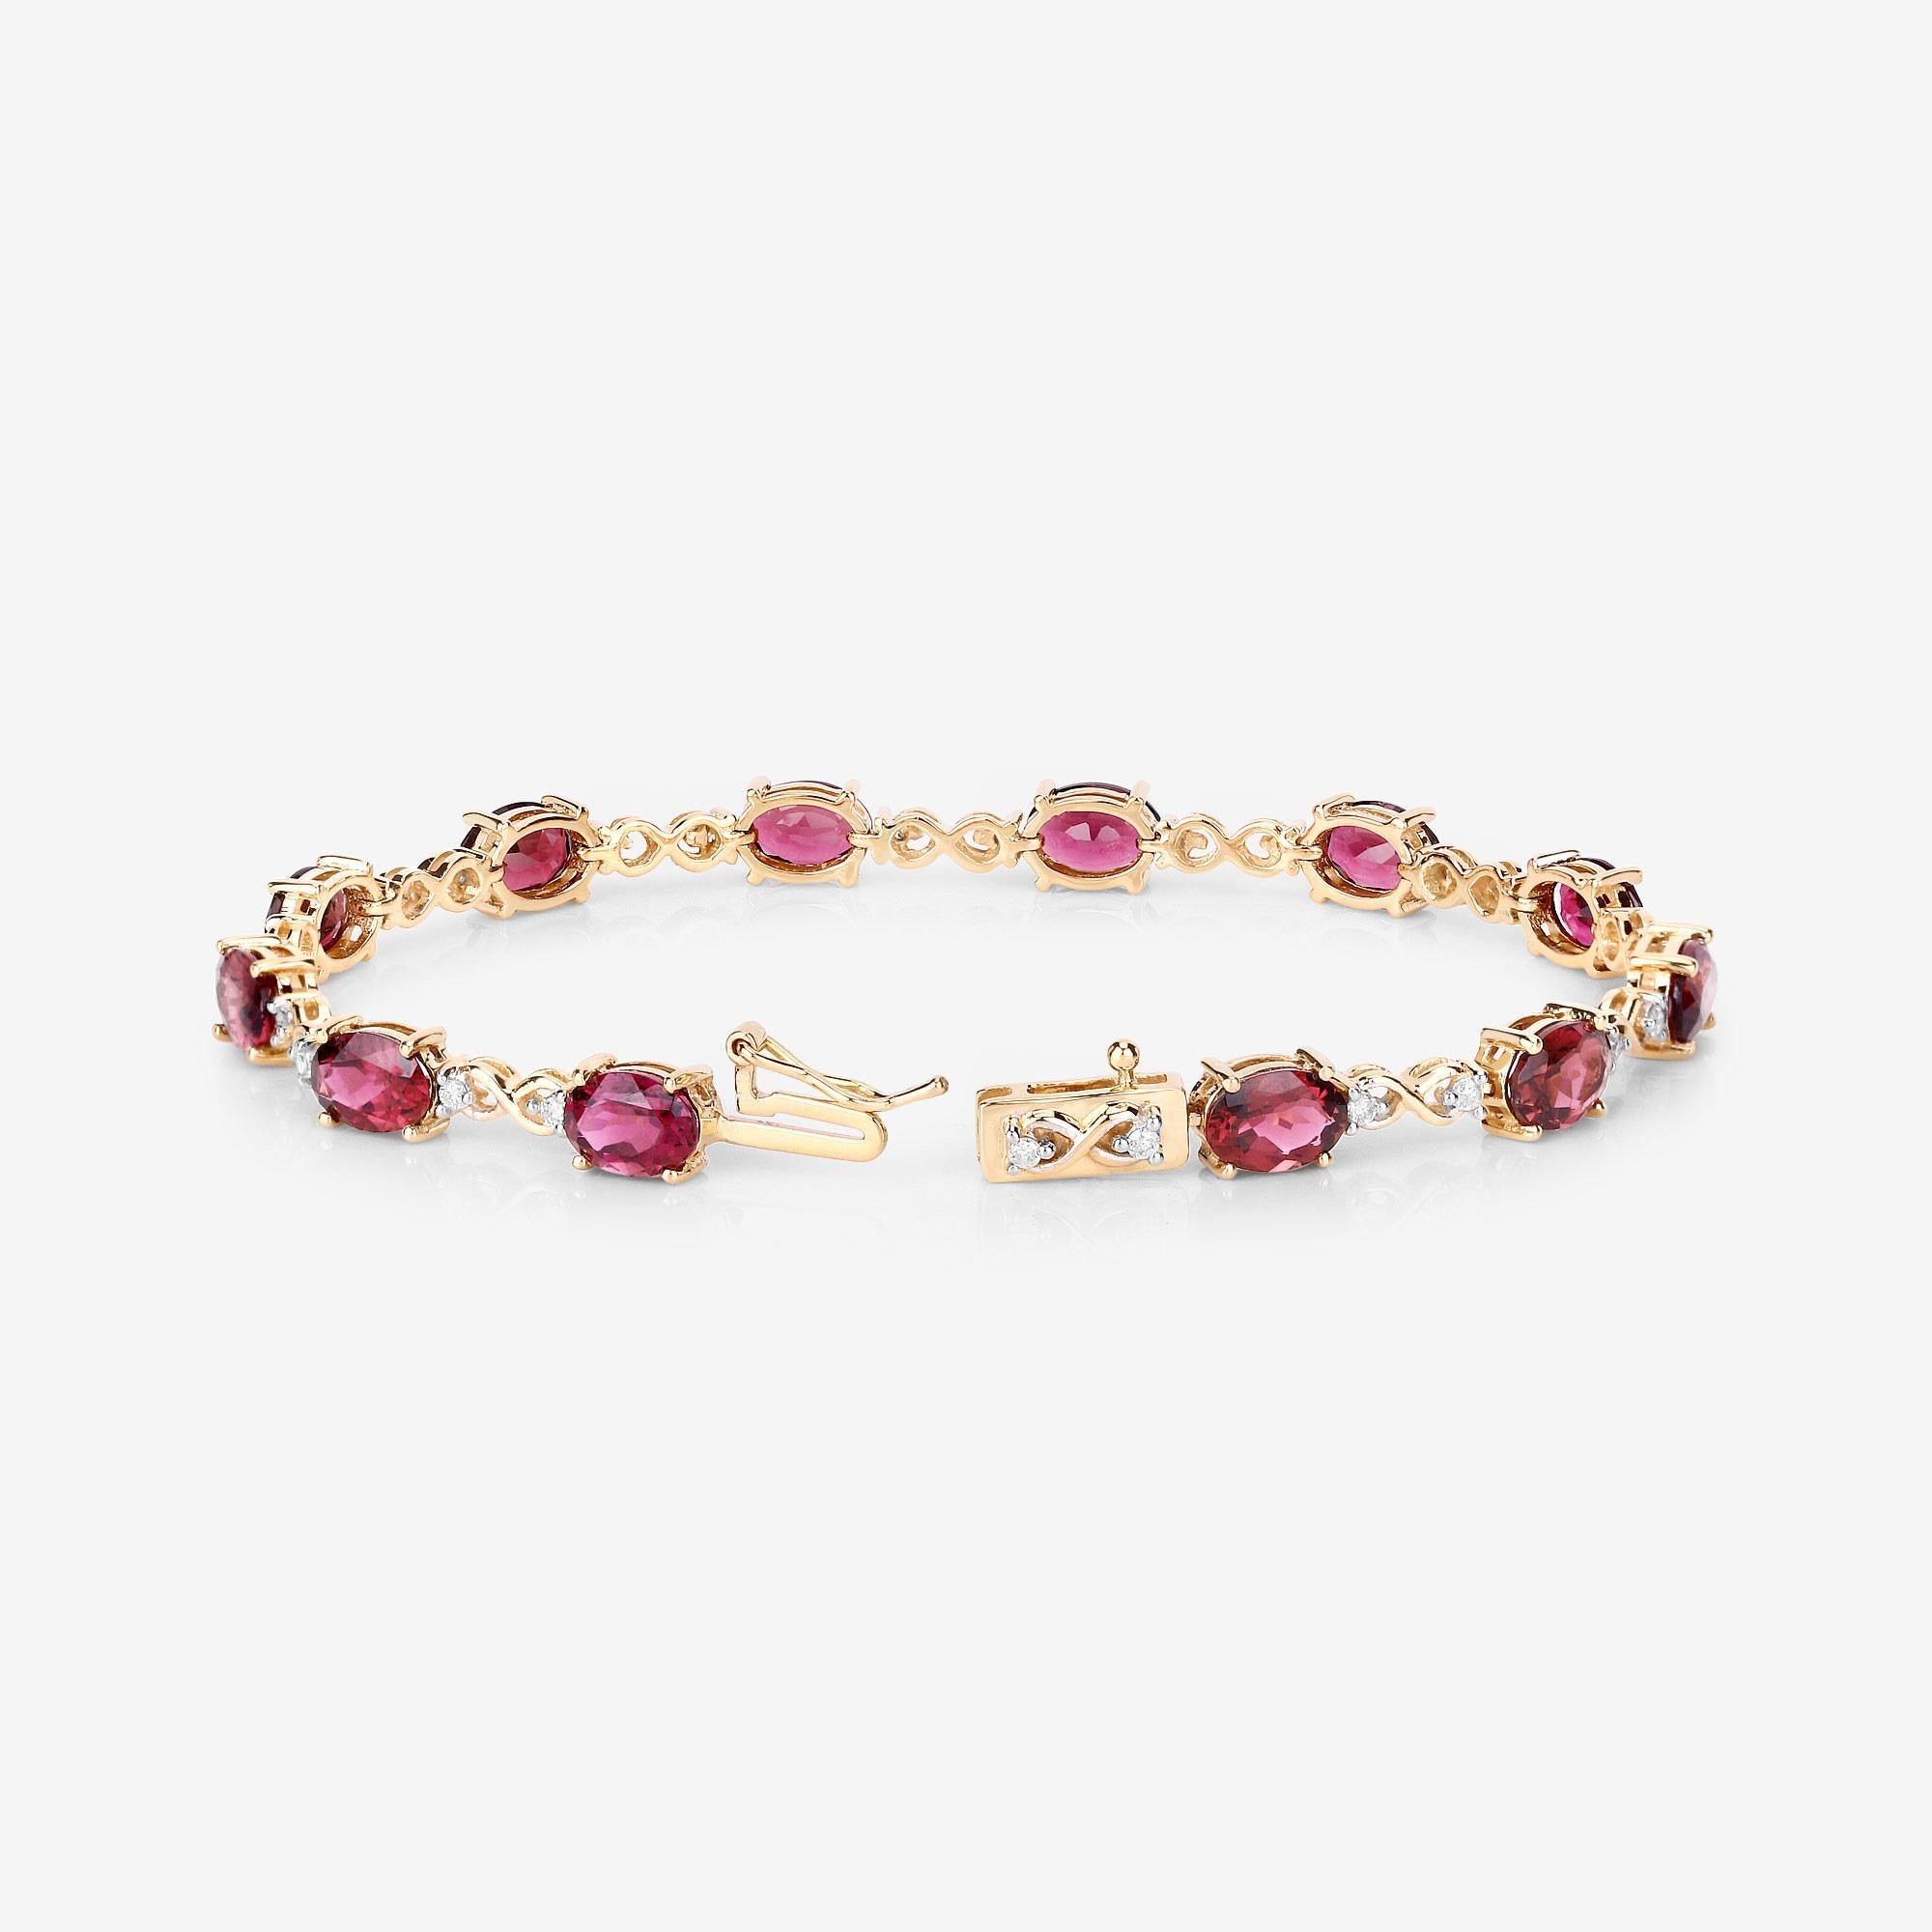 Natural Pink Tourmaline and Diamond Tennis Bracelet 8.75 Carats 14k Yellow Gold In Excellent Condition For Sale In Laguna Niguel, CA